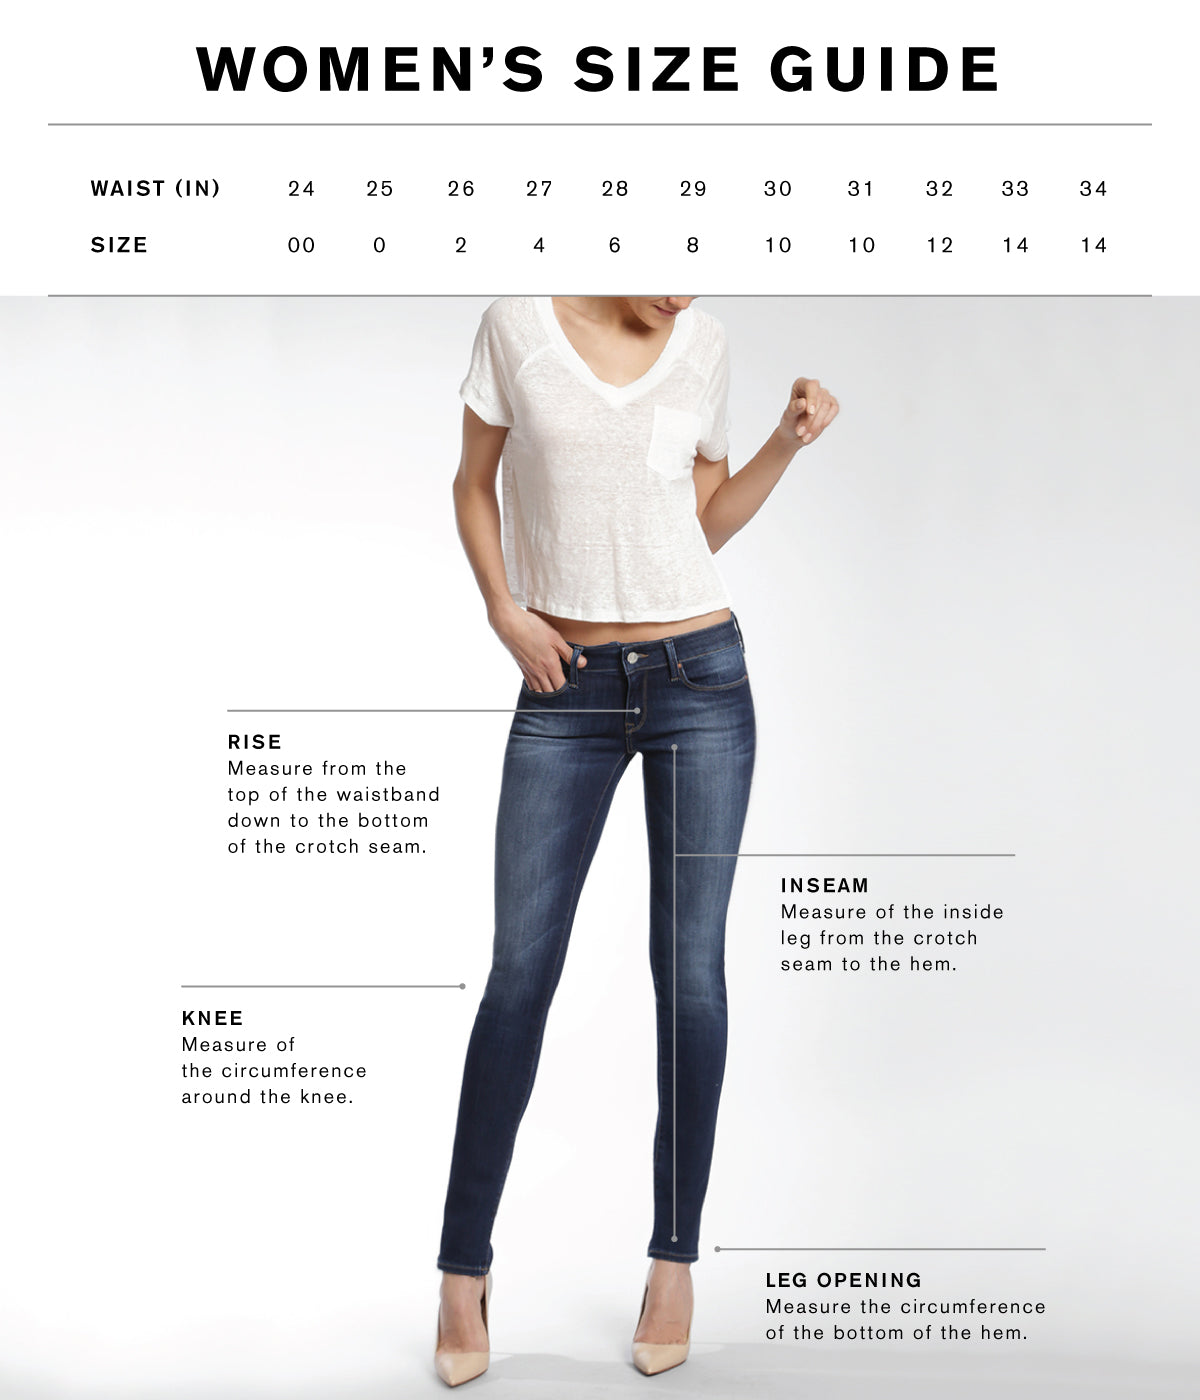 Women's Jeans Size Chart Conversion Sizing Guide | peacecommission.kdsg ...